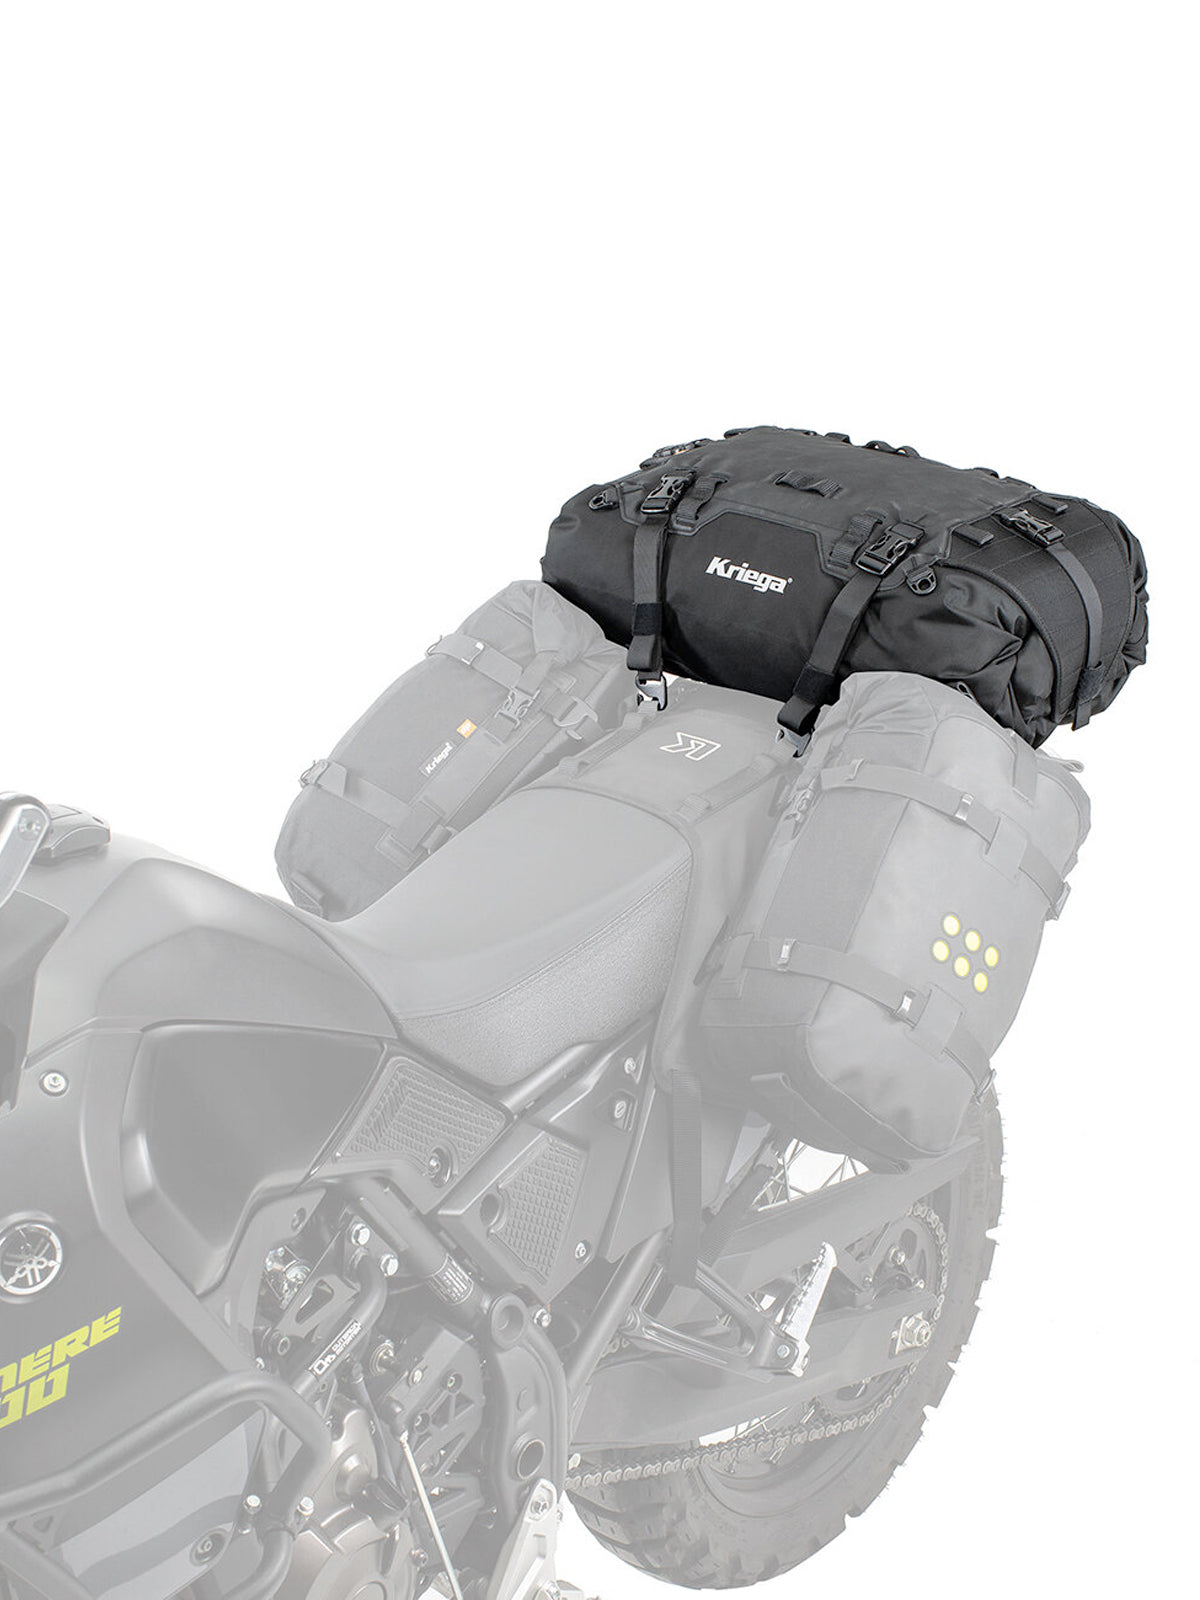 Kriega US40 Drypack Rackpack attached to rear of os base